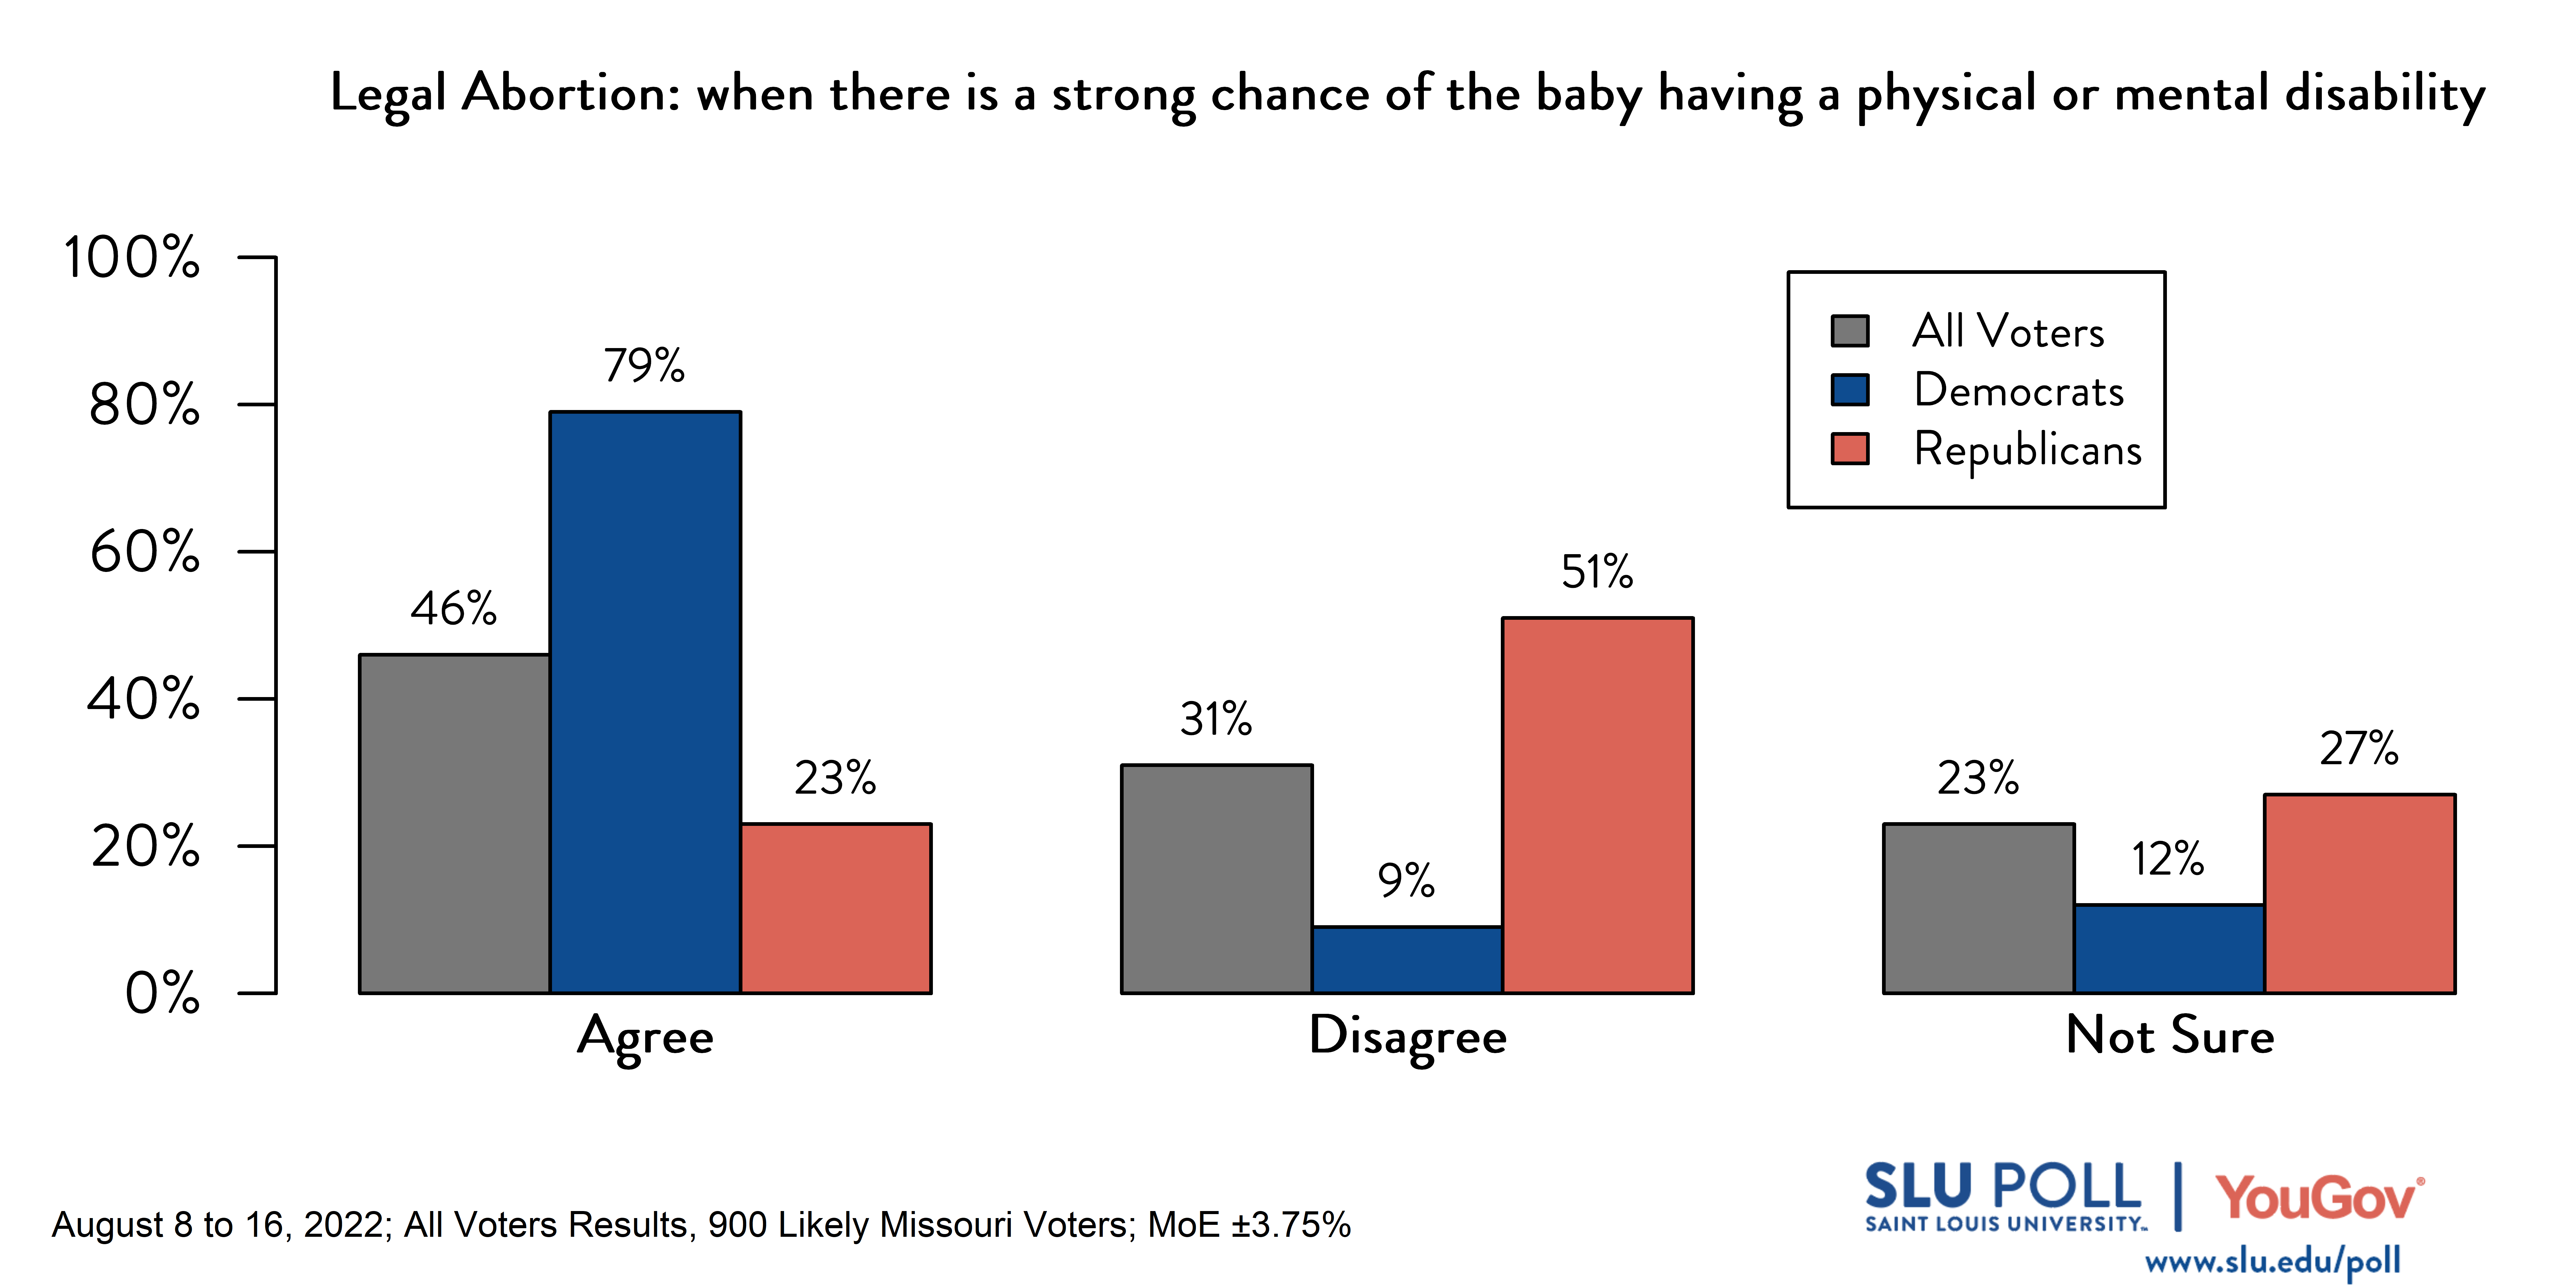 Likely voters' responses to 'Do you think it should be possible for a woman to legally obtain an abortion in the state of Missouri: when there is a strong chance of the baby having a physical or mental disability?': 46% Agree, 31% Disagree, and 23% Not Sure. Democratic voters' responses: ' 79% Agree, 9% Disagree, and 12% Not Sure. Republican voters' responses: 23% Agree, 51% Disagree, and 27% Not Sure. 